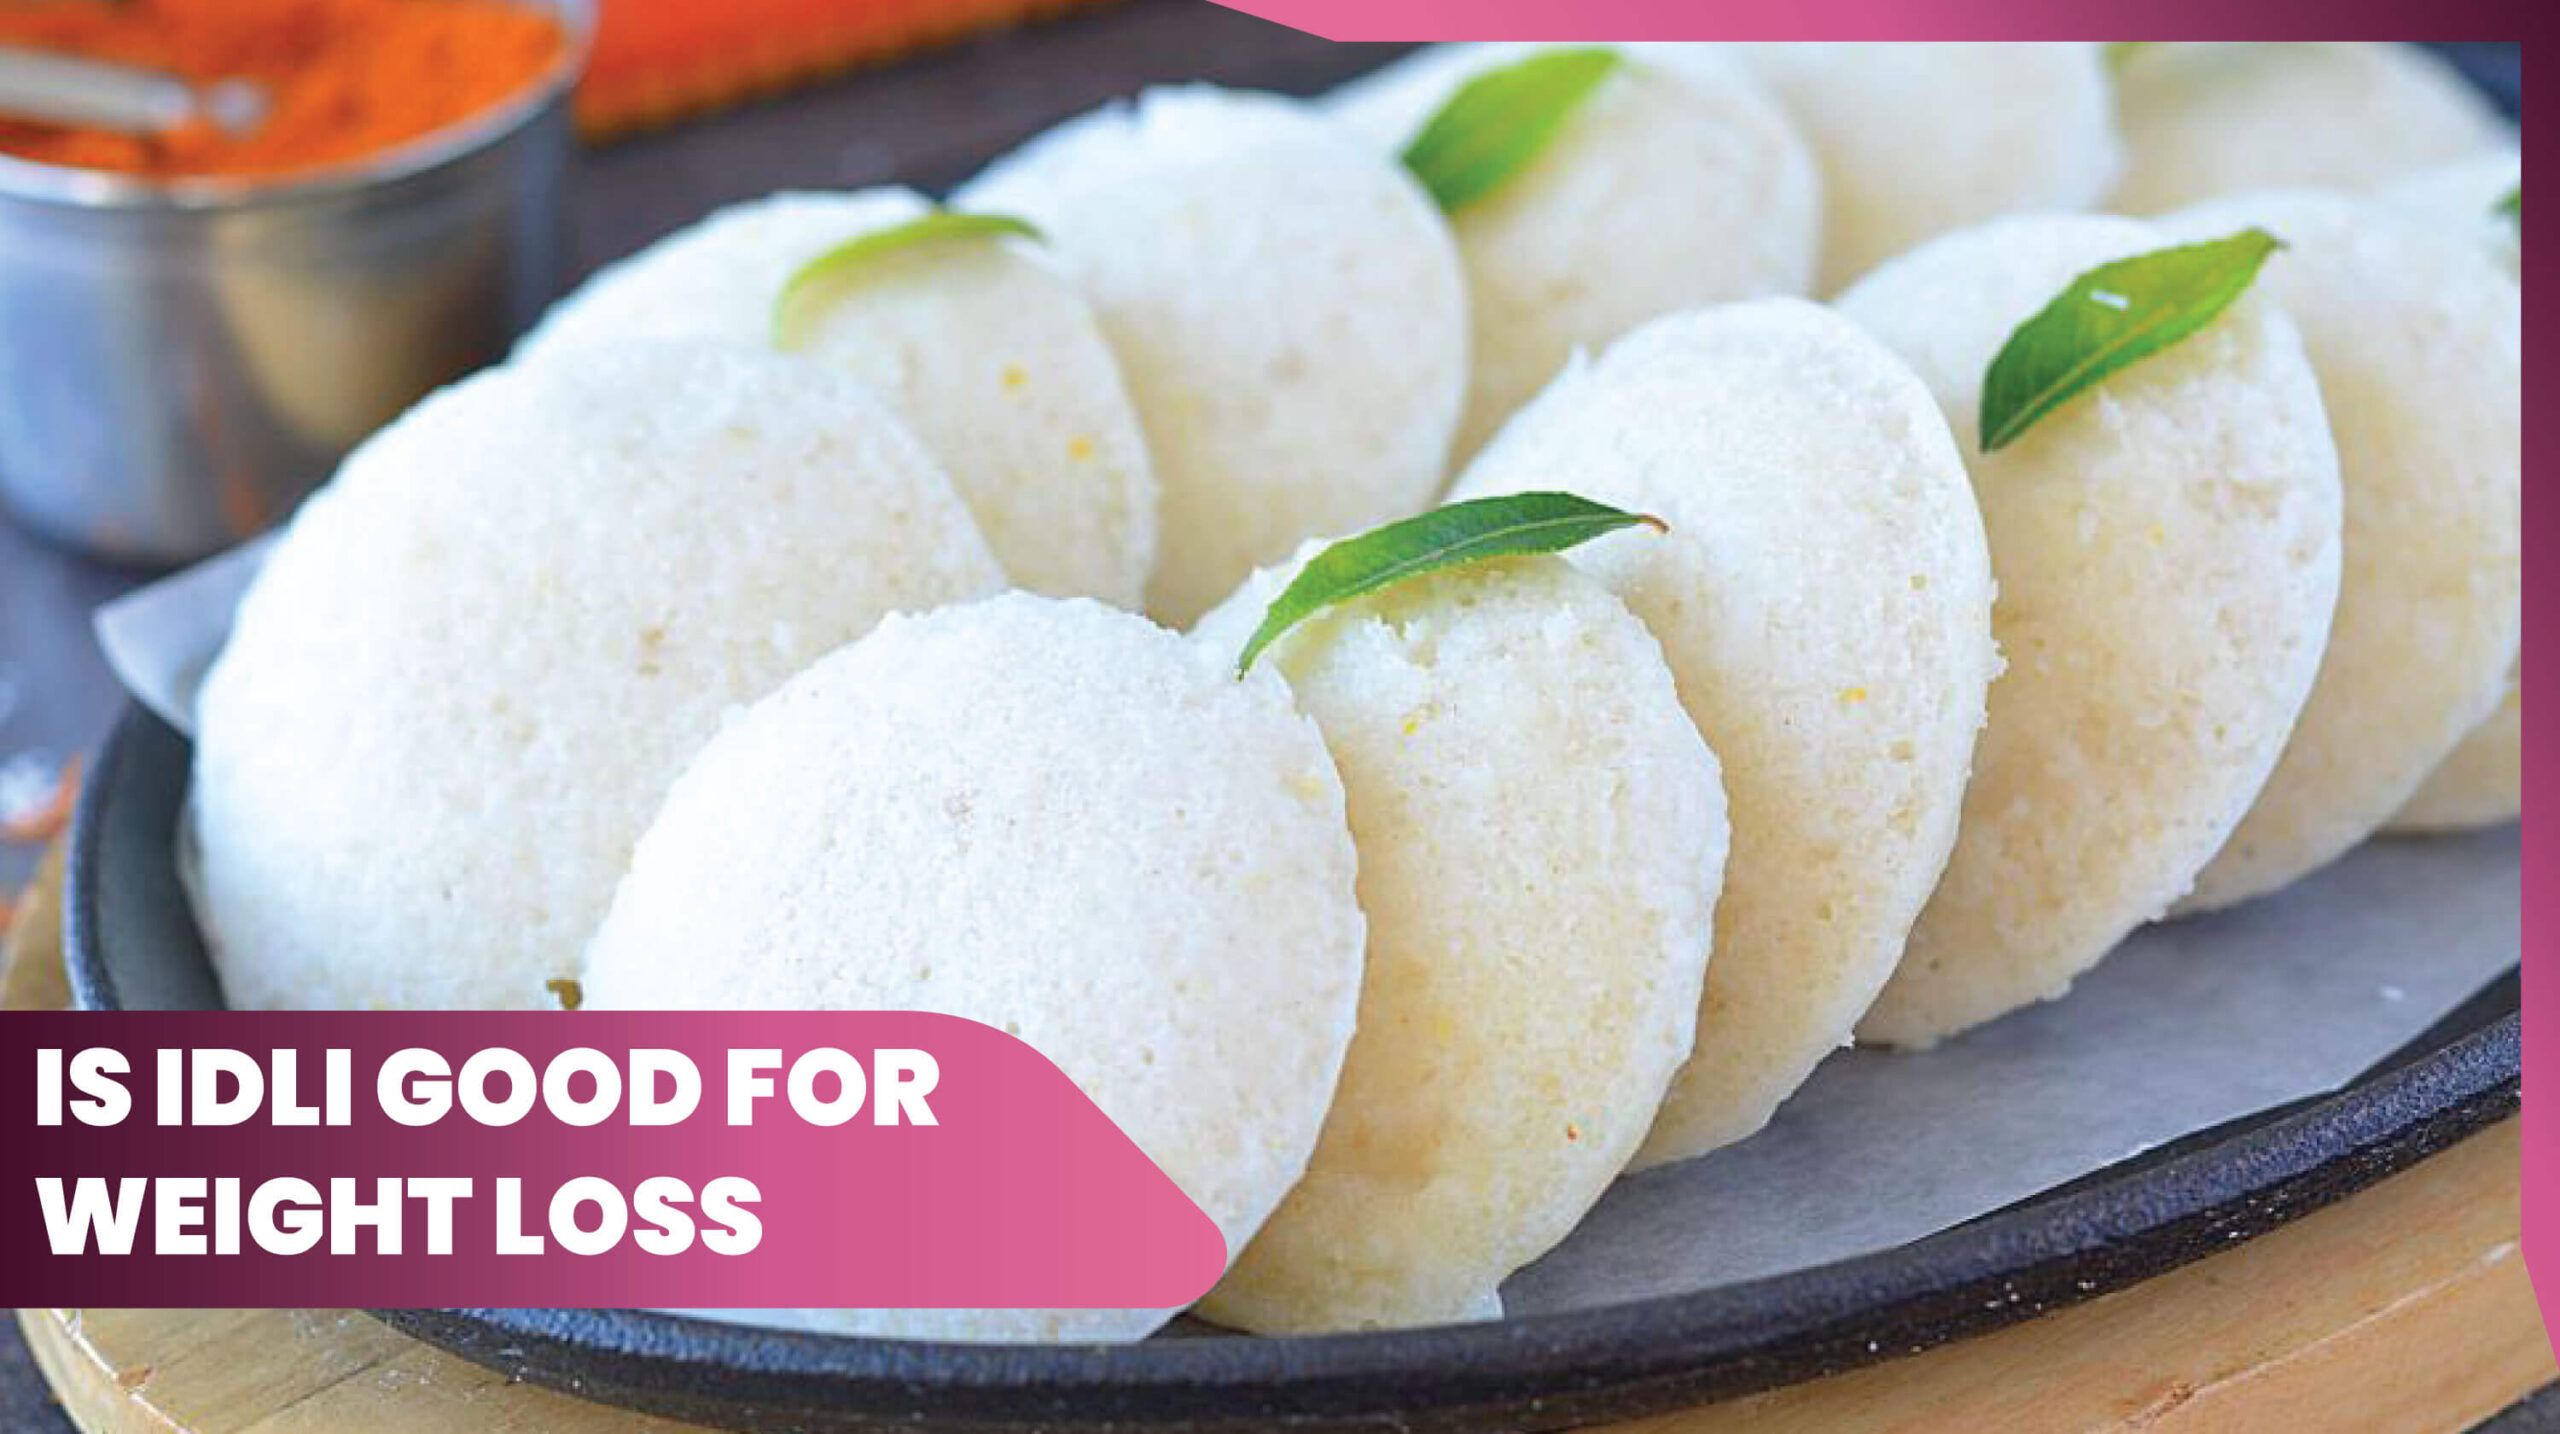 11benefits of idli diet for weight loss